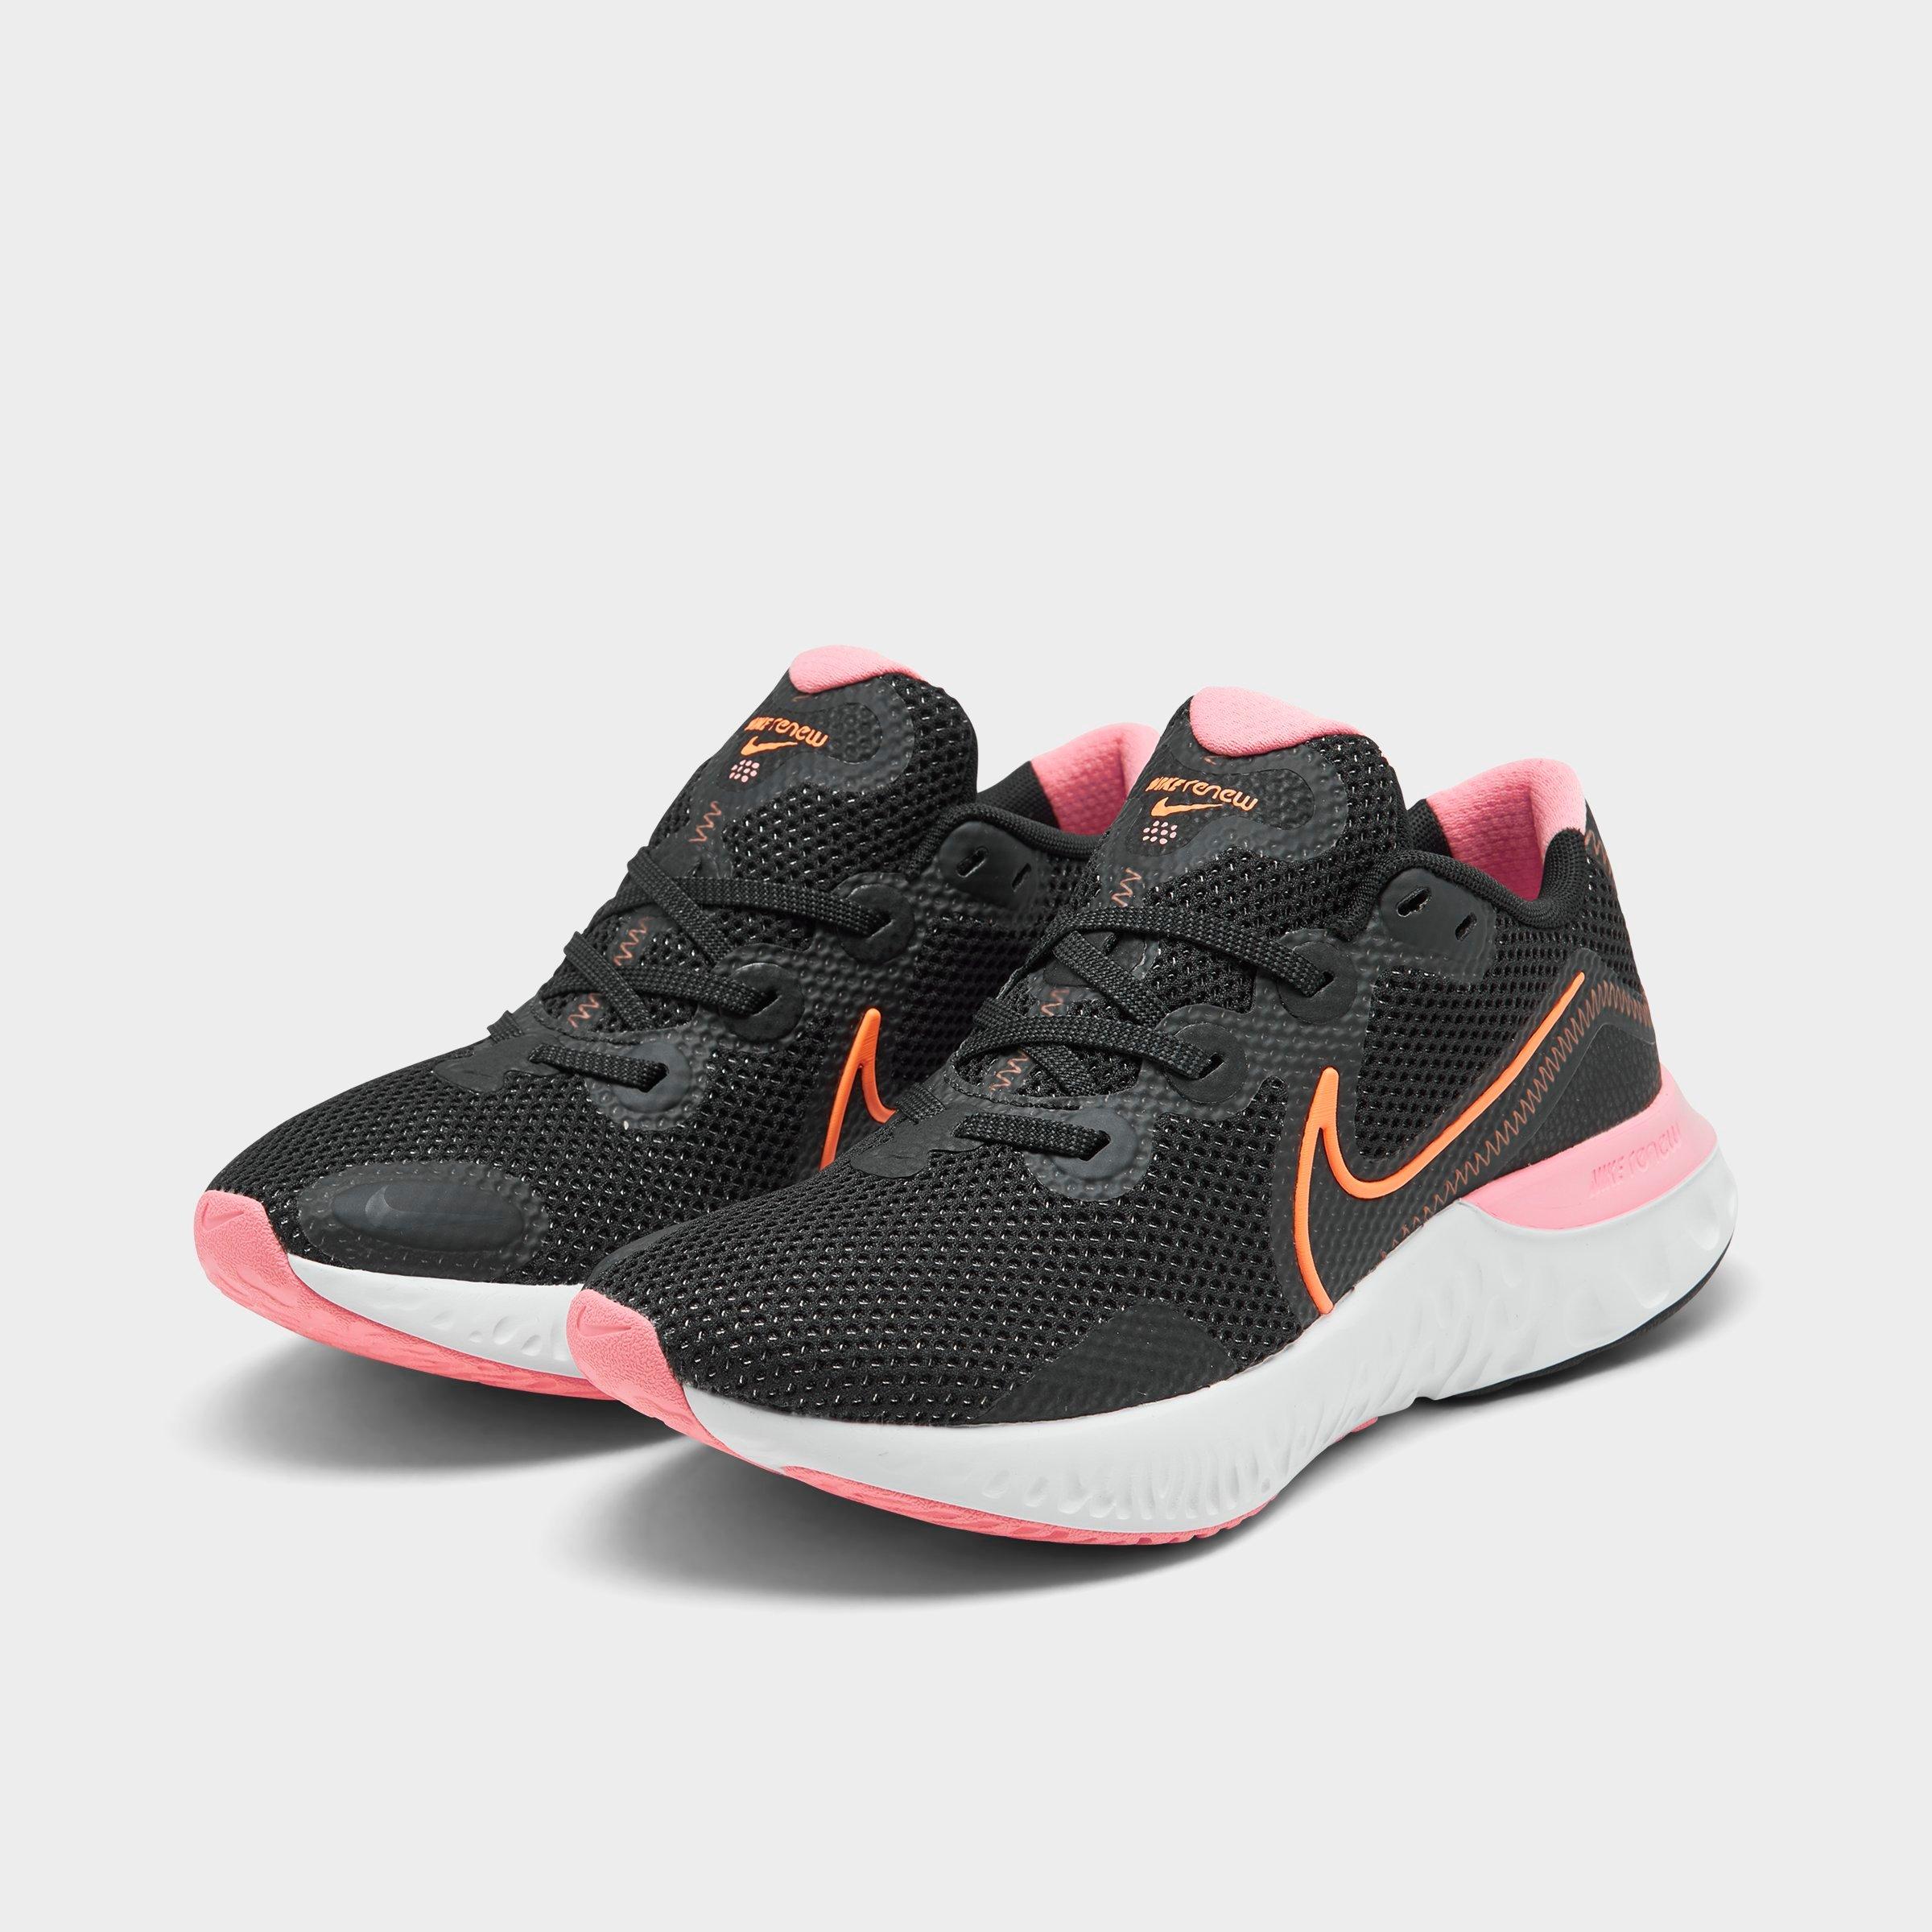 nike black and pink running shoes